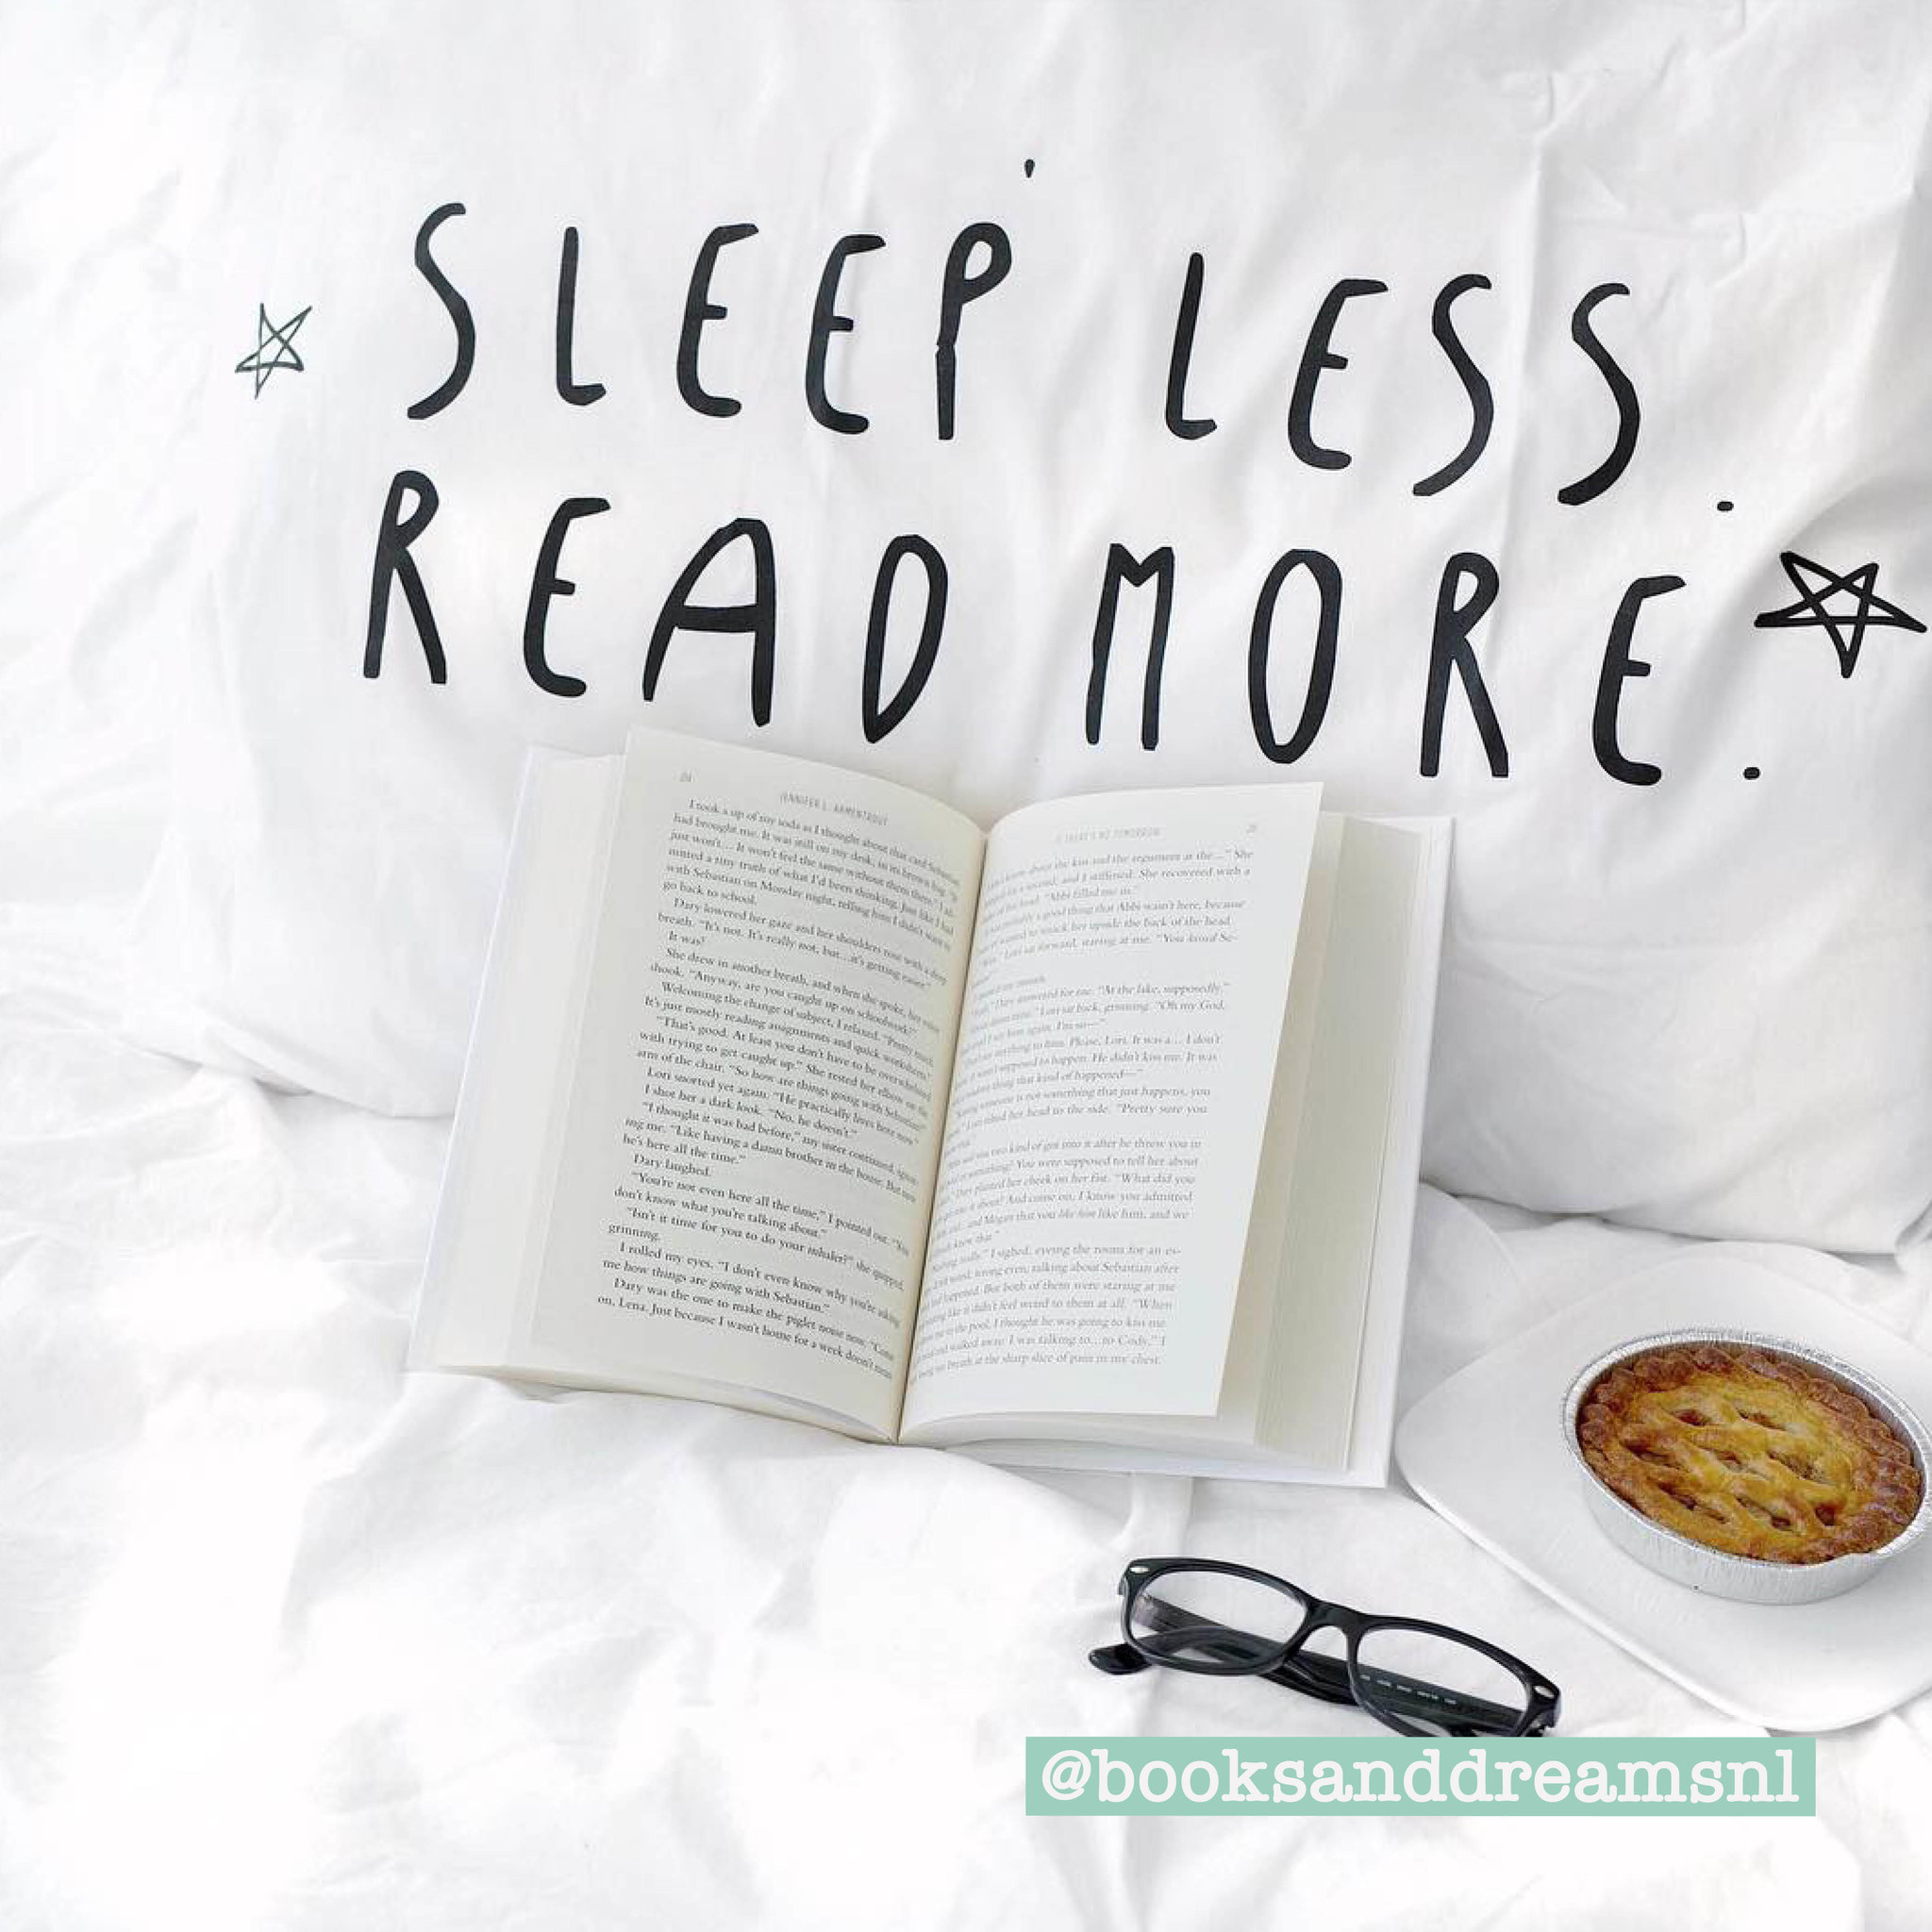 Blossom Books Bed Pillow: Sleep less, read more!